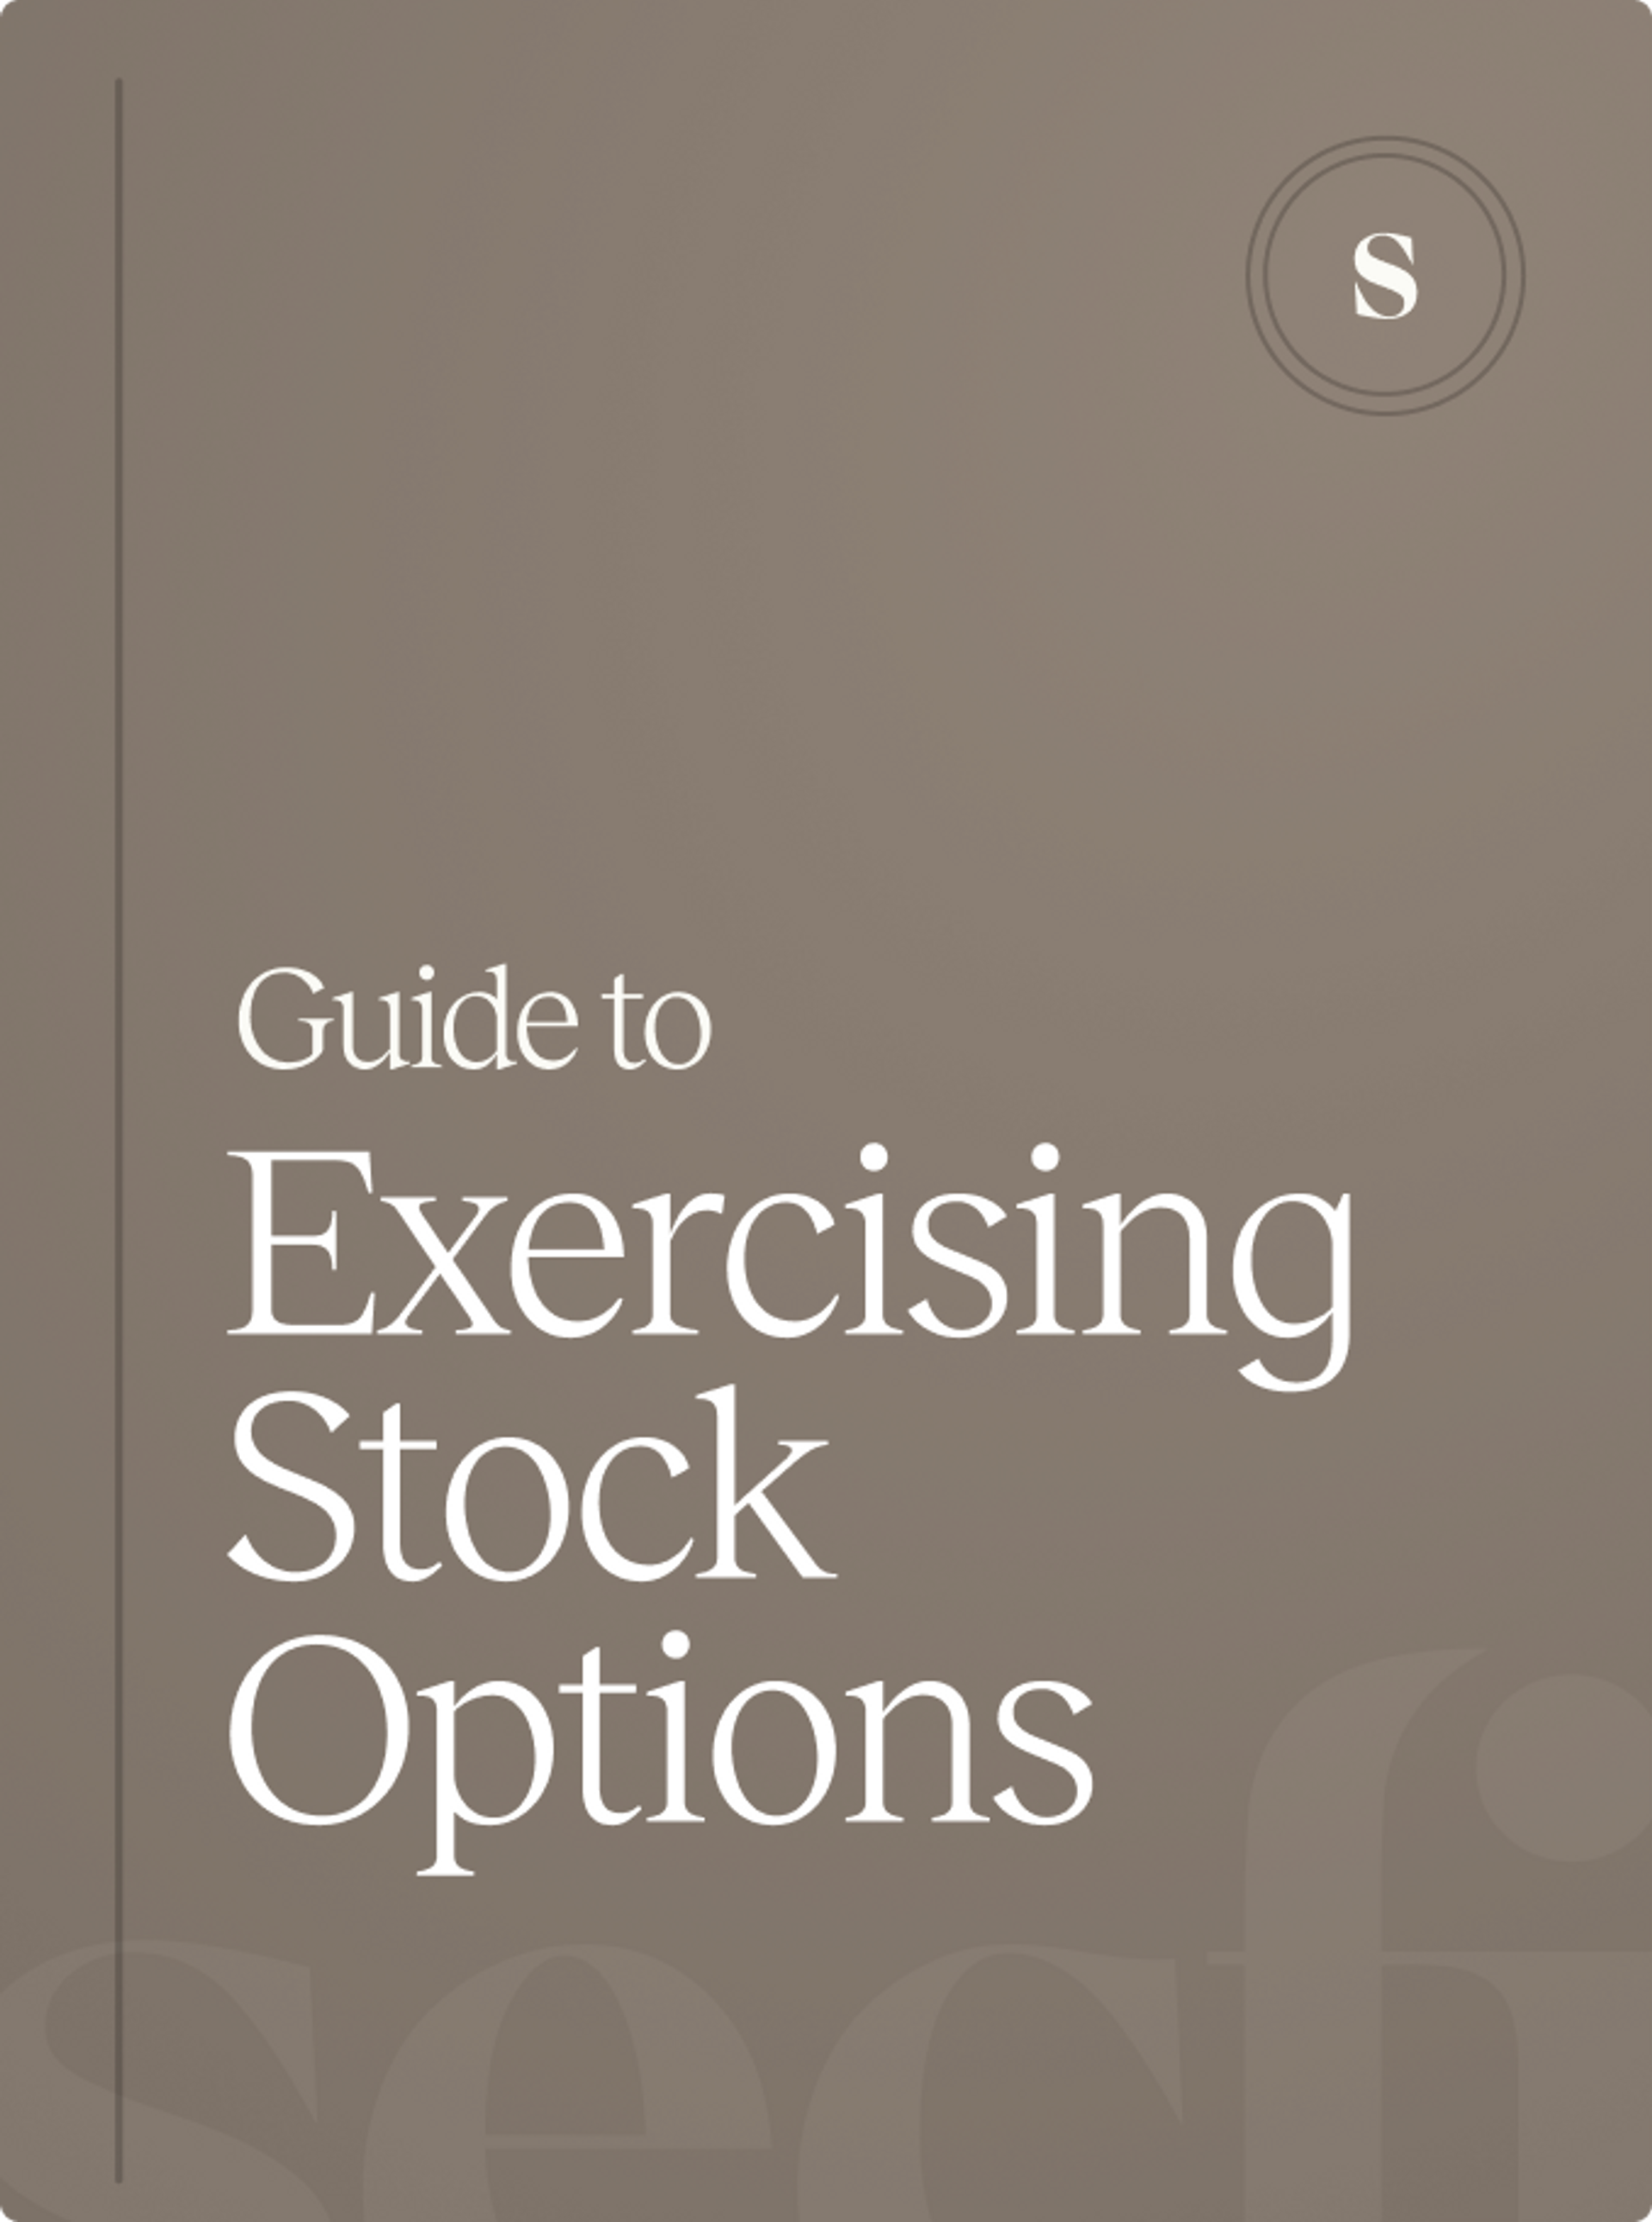 The complete guide to exercising stock options image